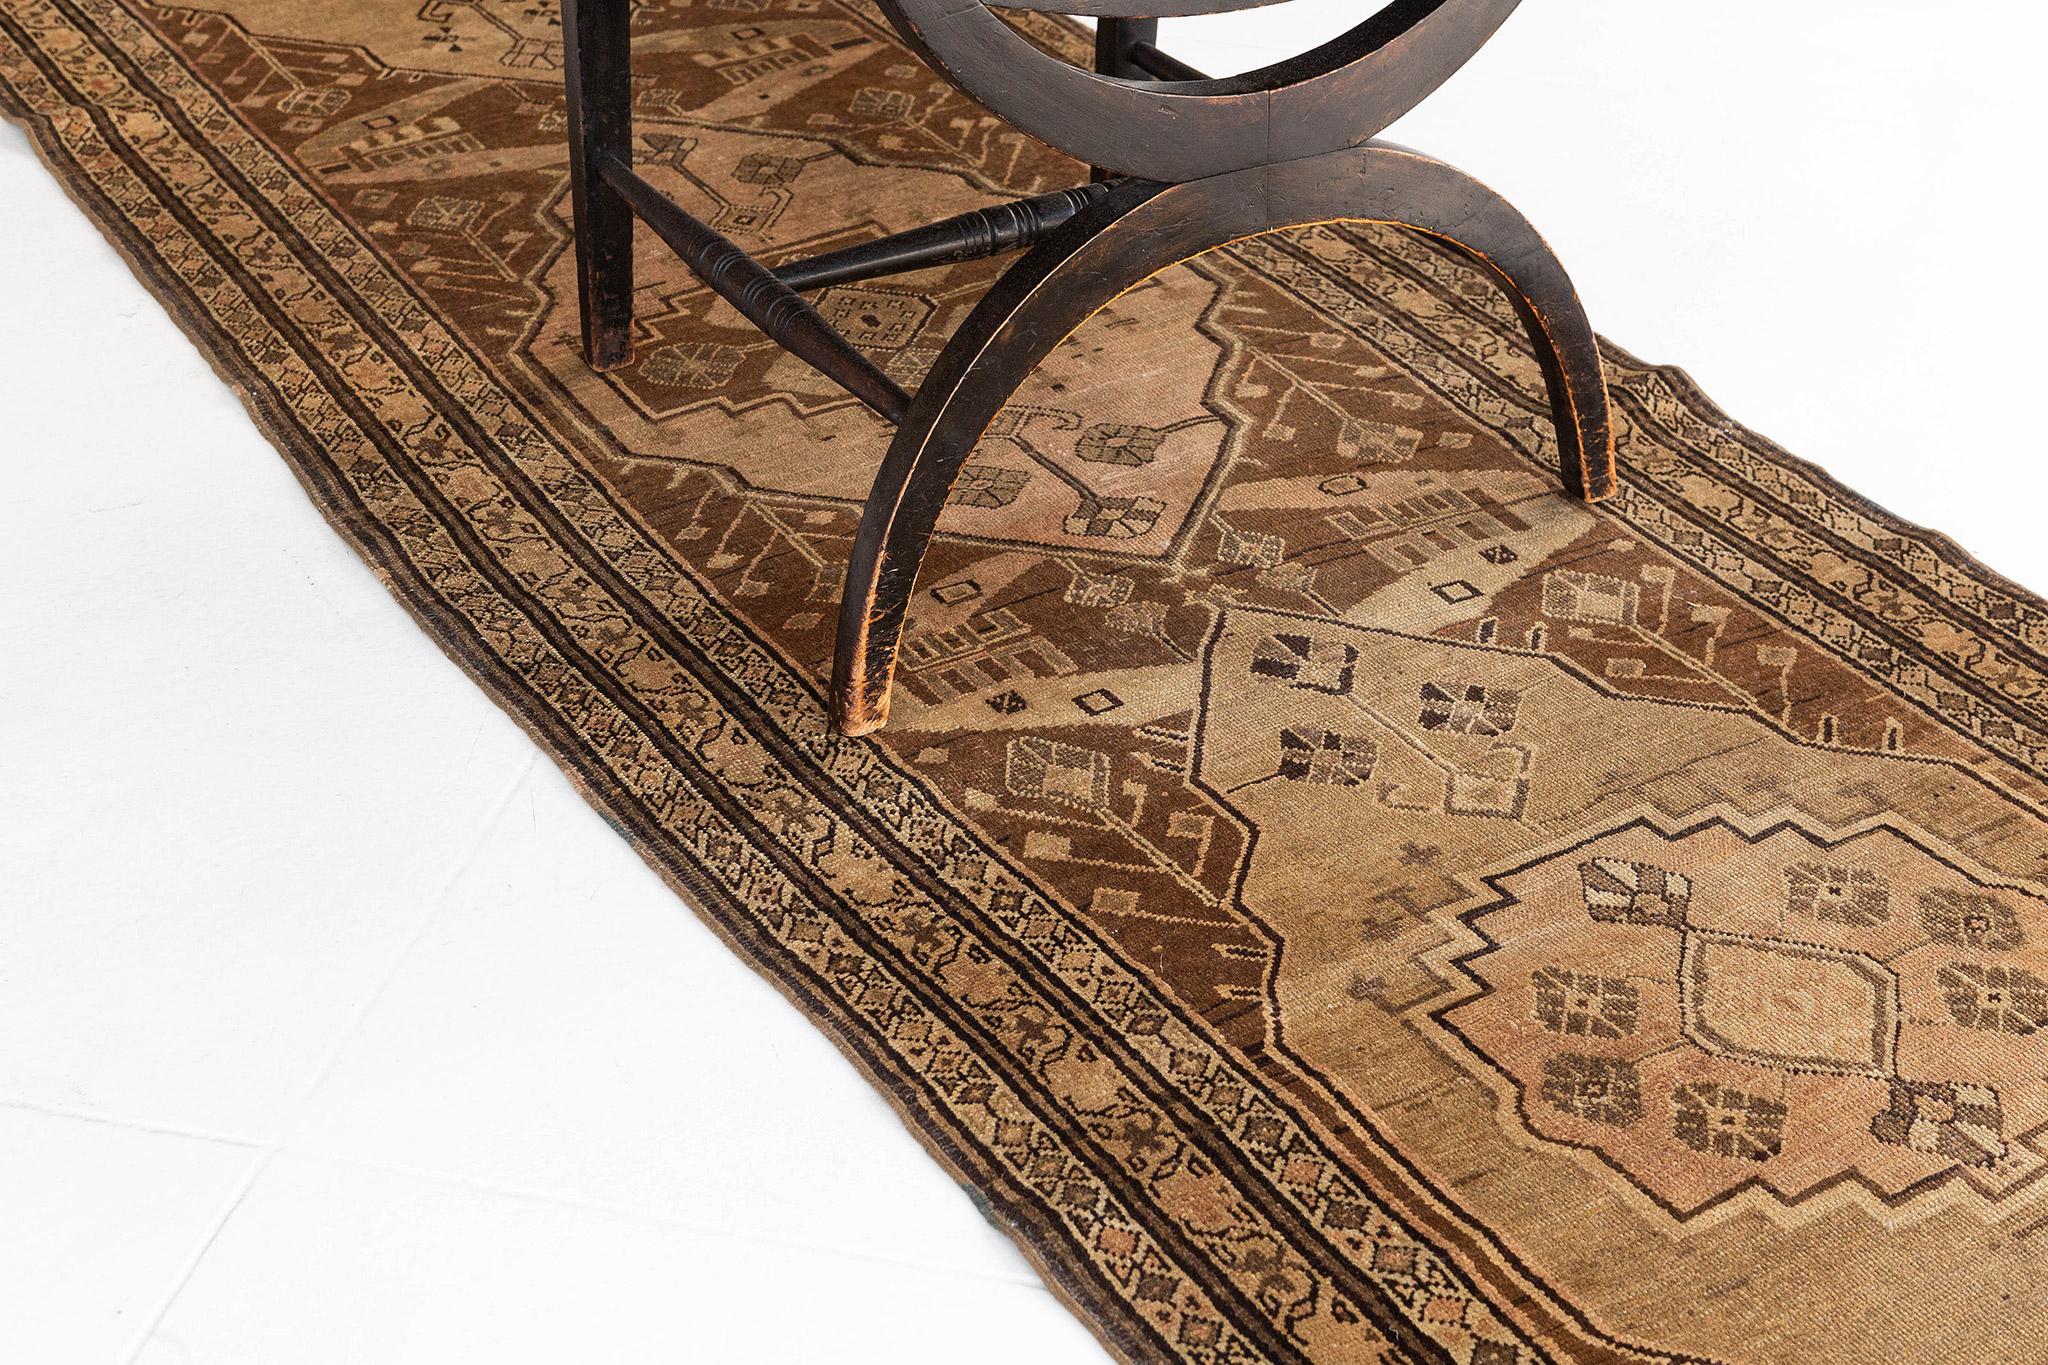 This runner contains neutral brown and beige colored tones along with geometric tribal patterns. Three thin borders outline the center and helps give this piece some character.

Rug Number
12695
Size
2' 11